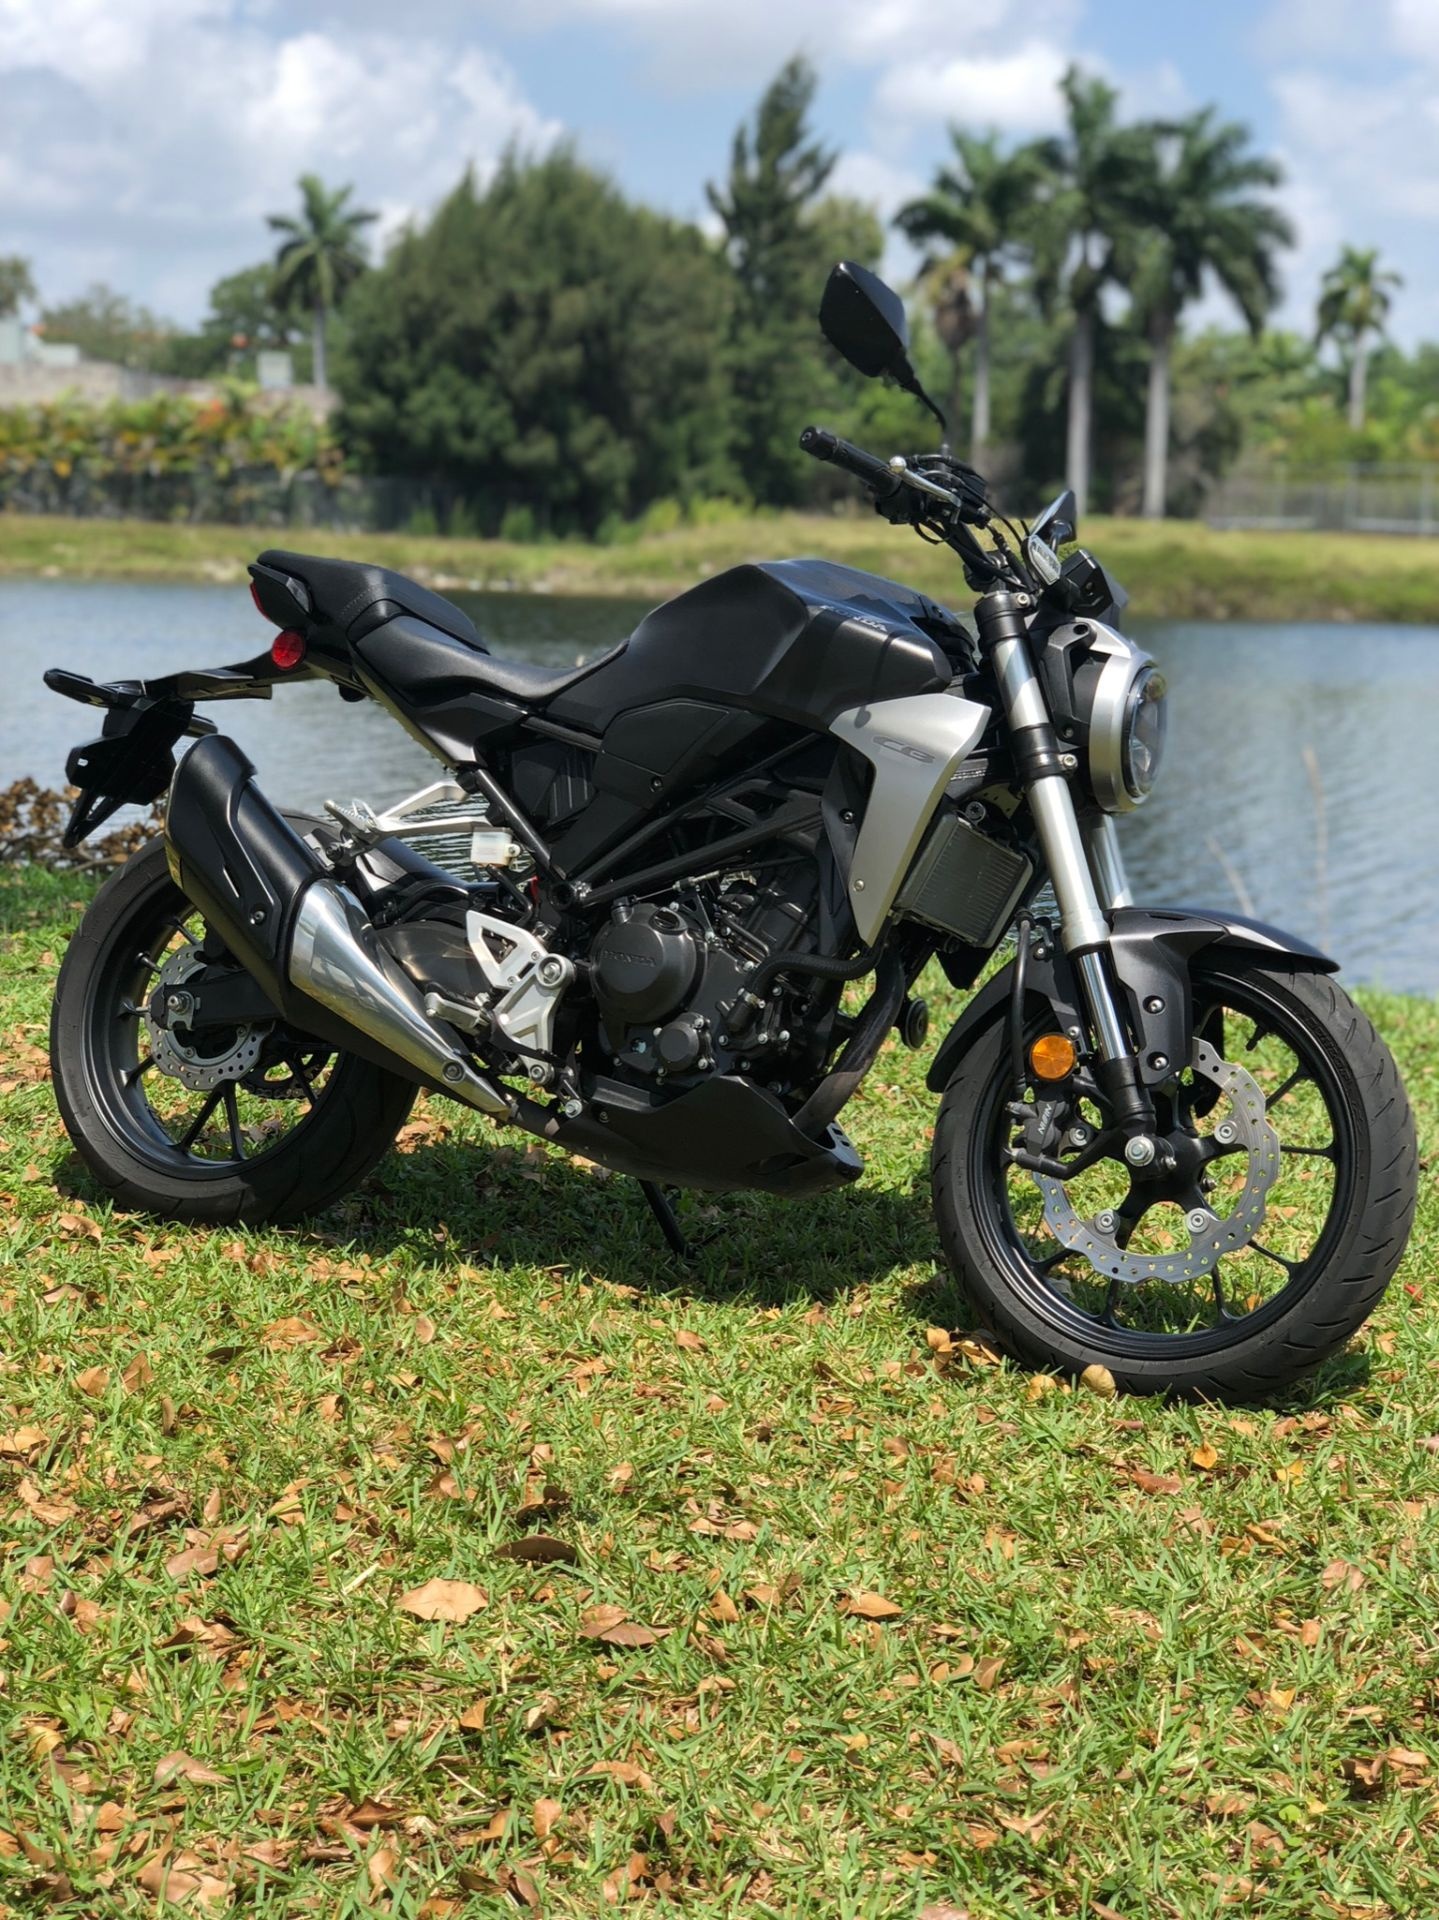 Honda CB300R, Certified pre-owned, Metallic gray color, Reliable and stylish, 1440x1920 HD Handy